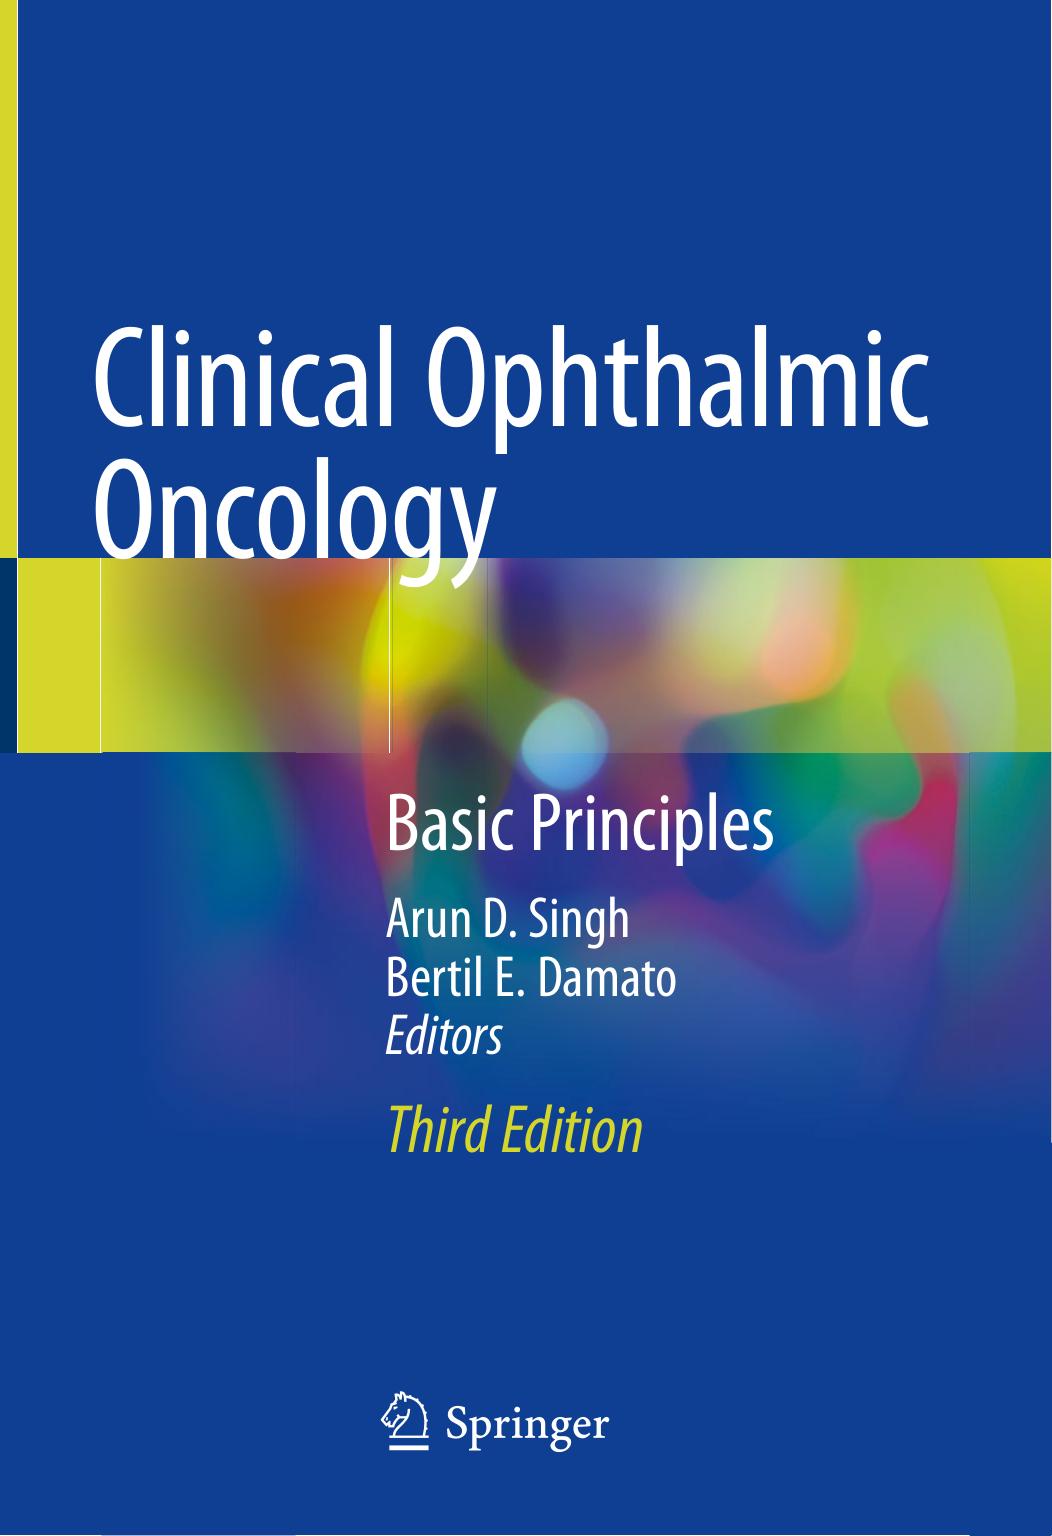 Clinical Ophthalmic Oncology  Basic Principles (2019)